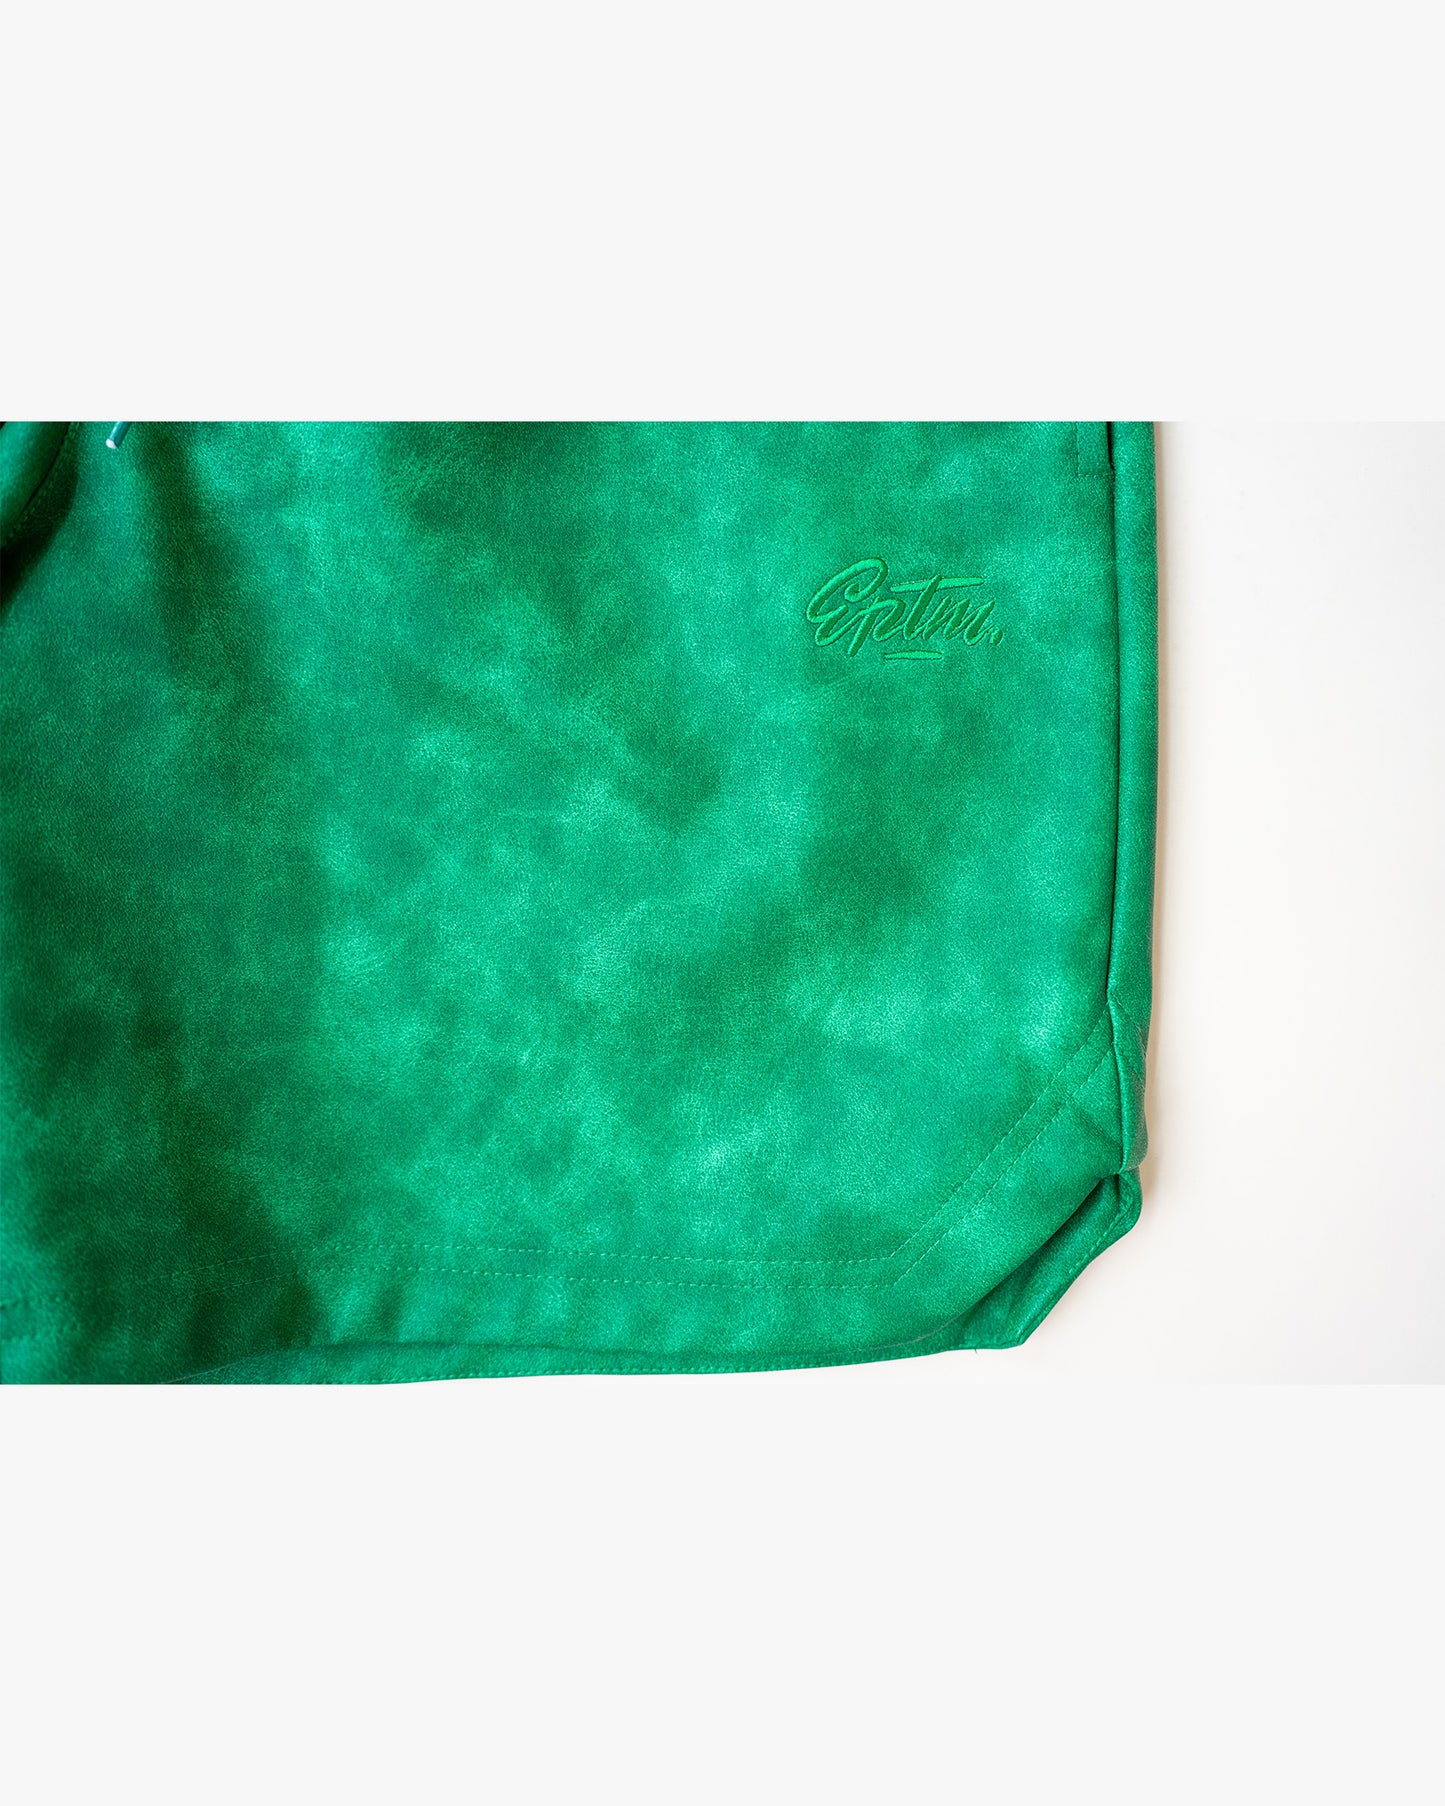 EPTM LUXE SHORTS - GREEN